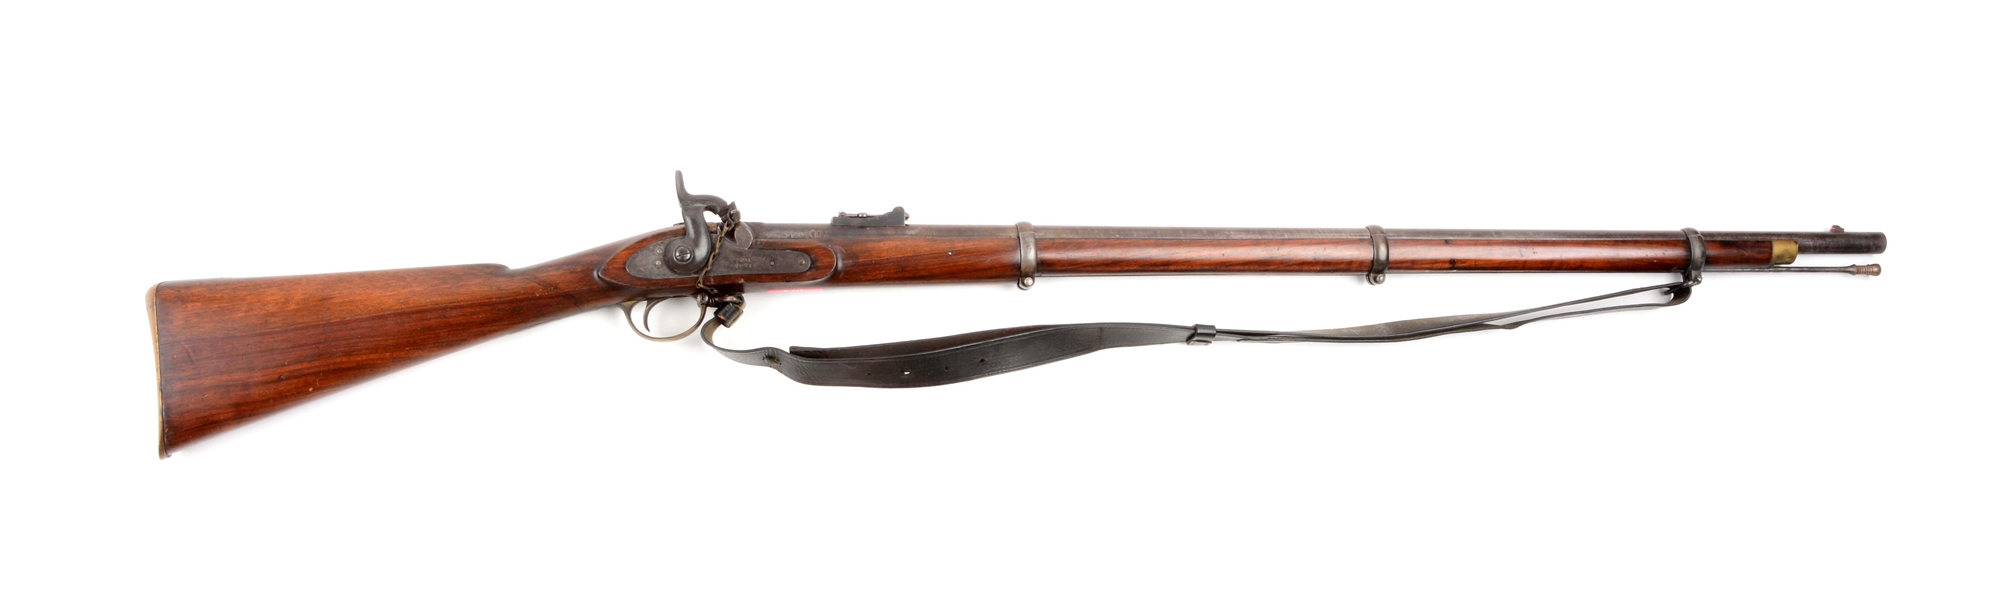 (A) BRITISH MODEL 1853 ENFIELD RIFLE - MUSKET WITH SLING.